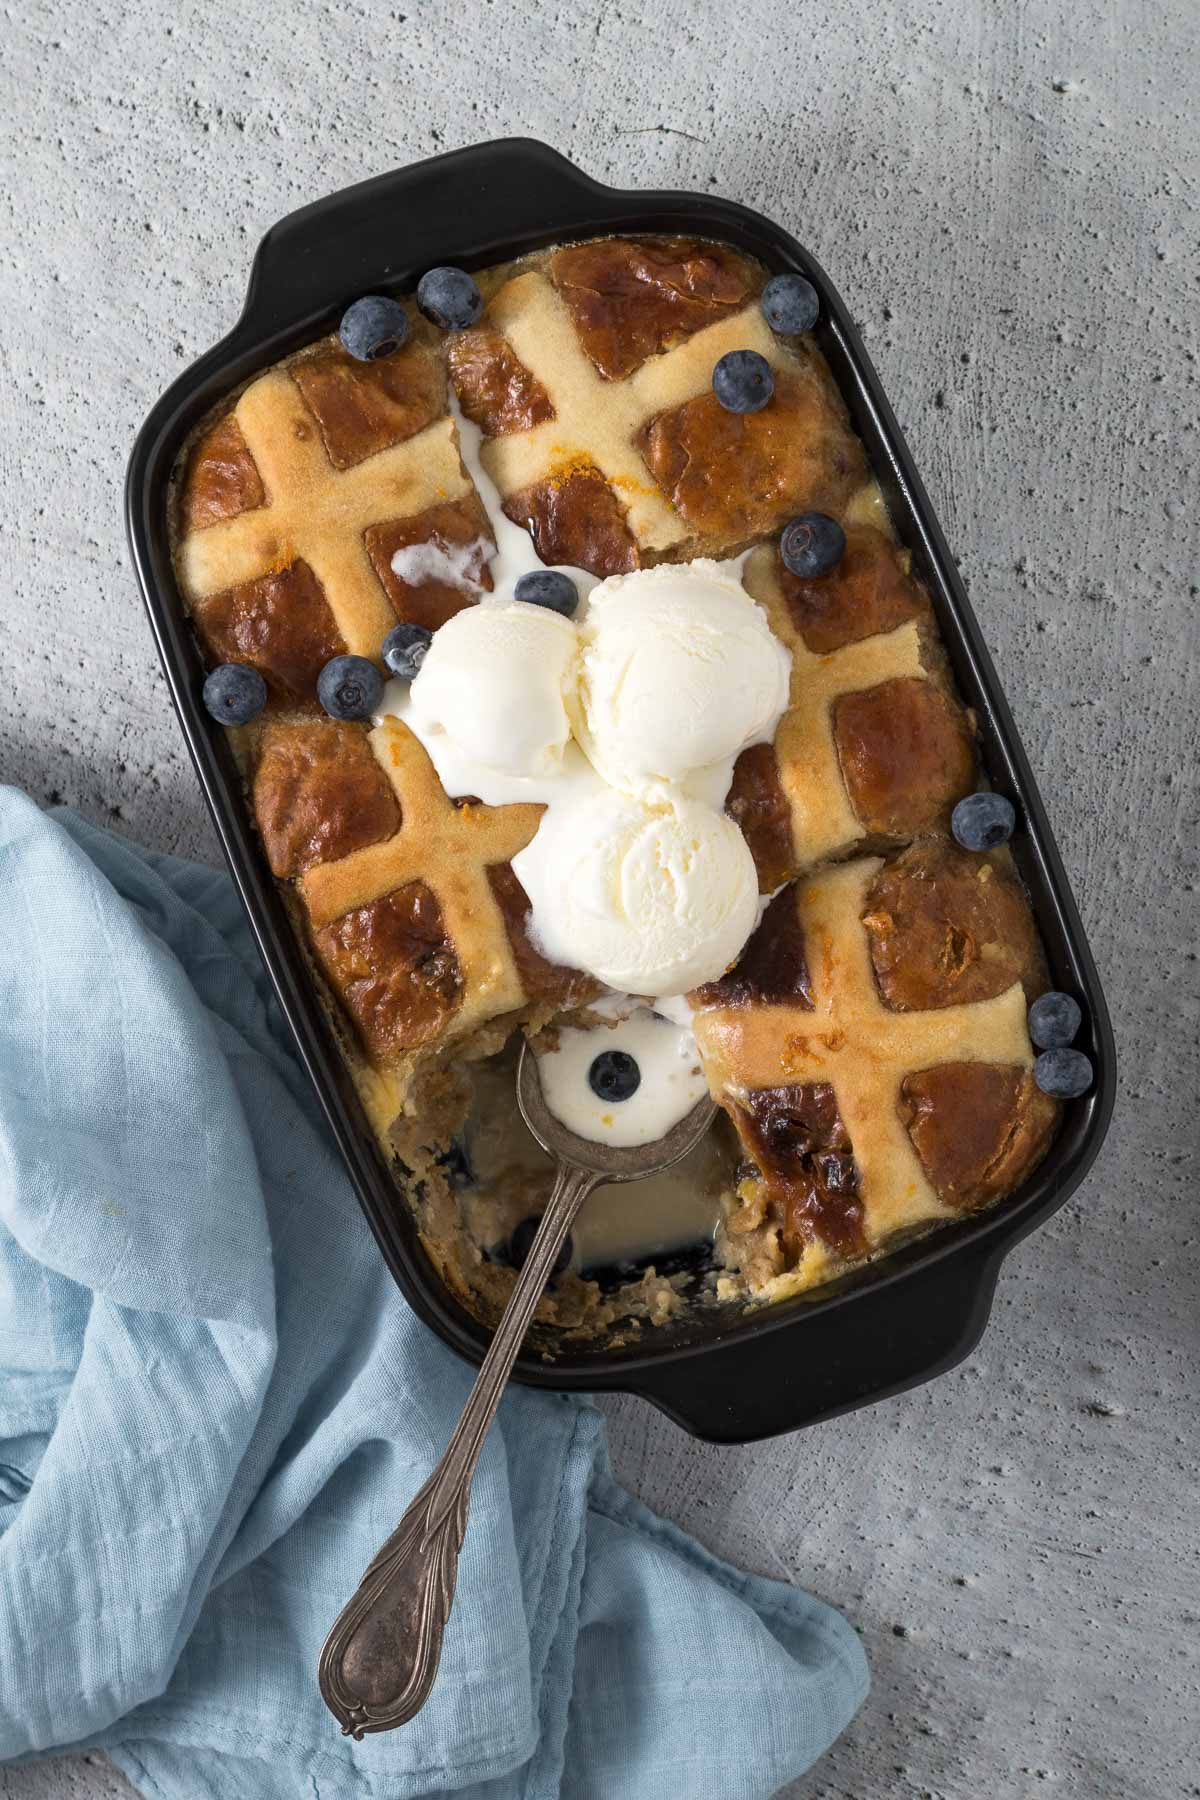 Hot cross bun pudding in serving dish with vanilla ice cream and fresh blueberries.